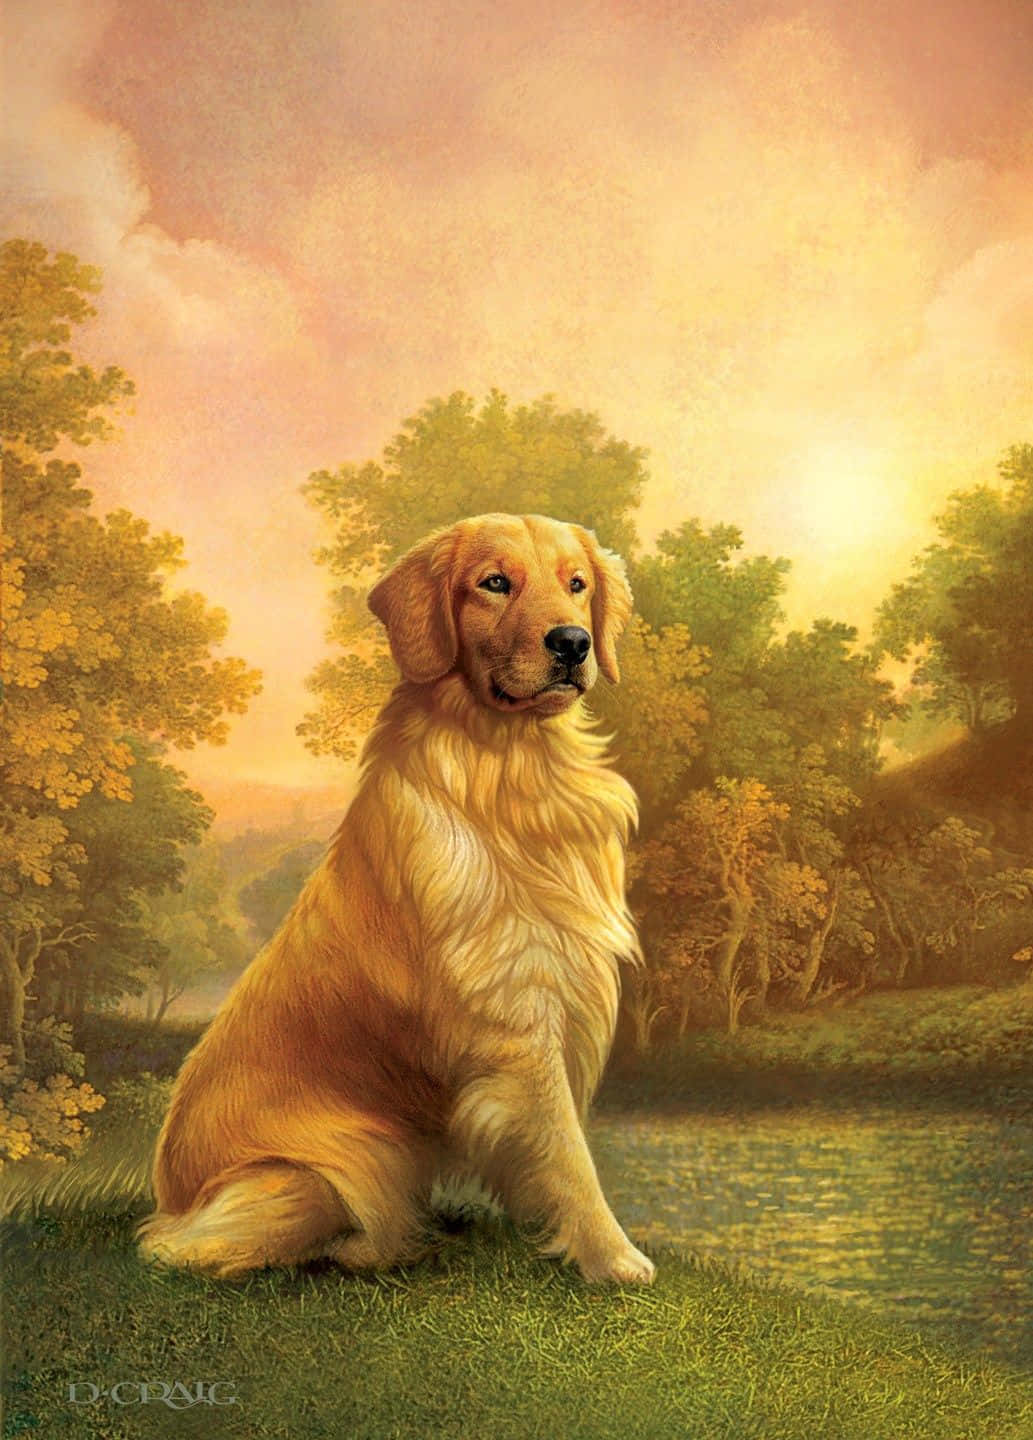 A beautiful golden retriever looking for love and affection